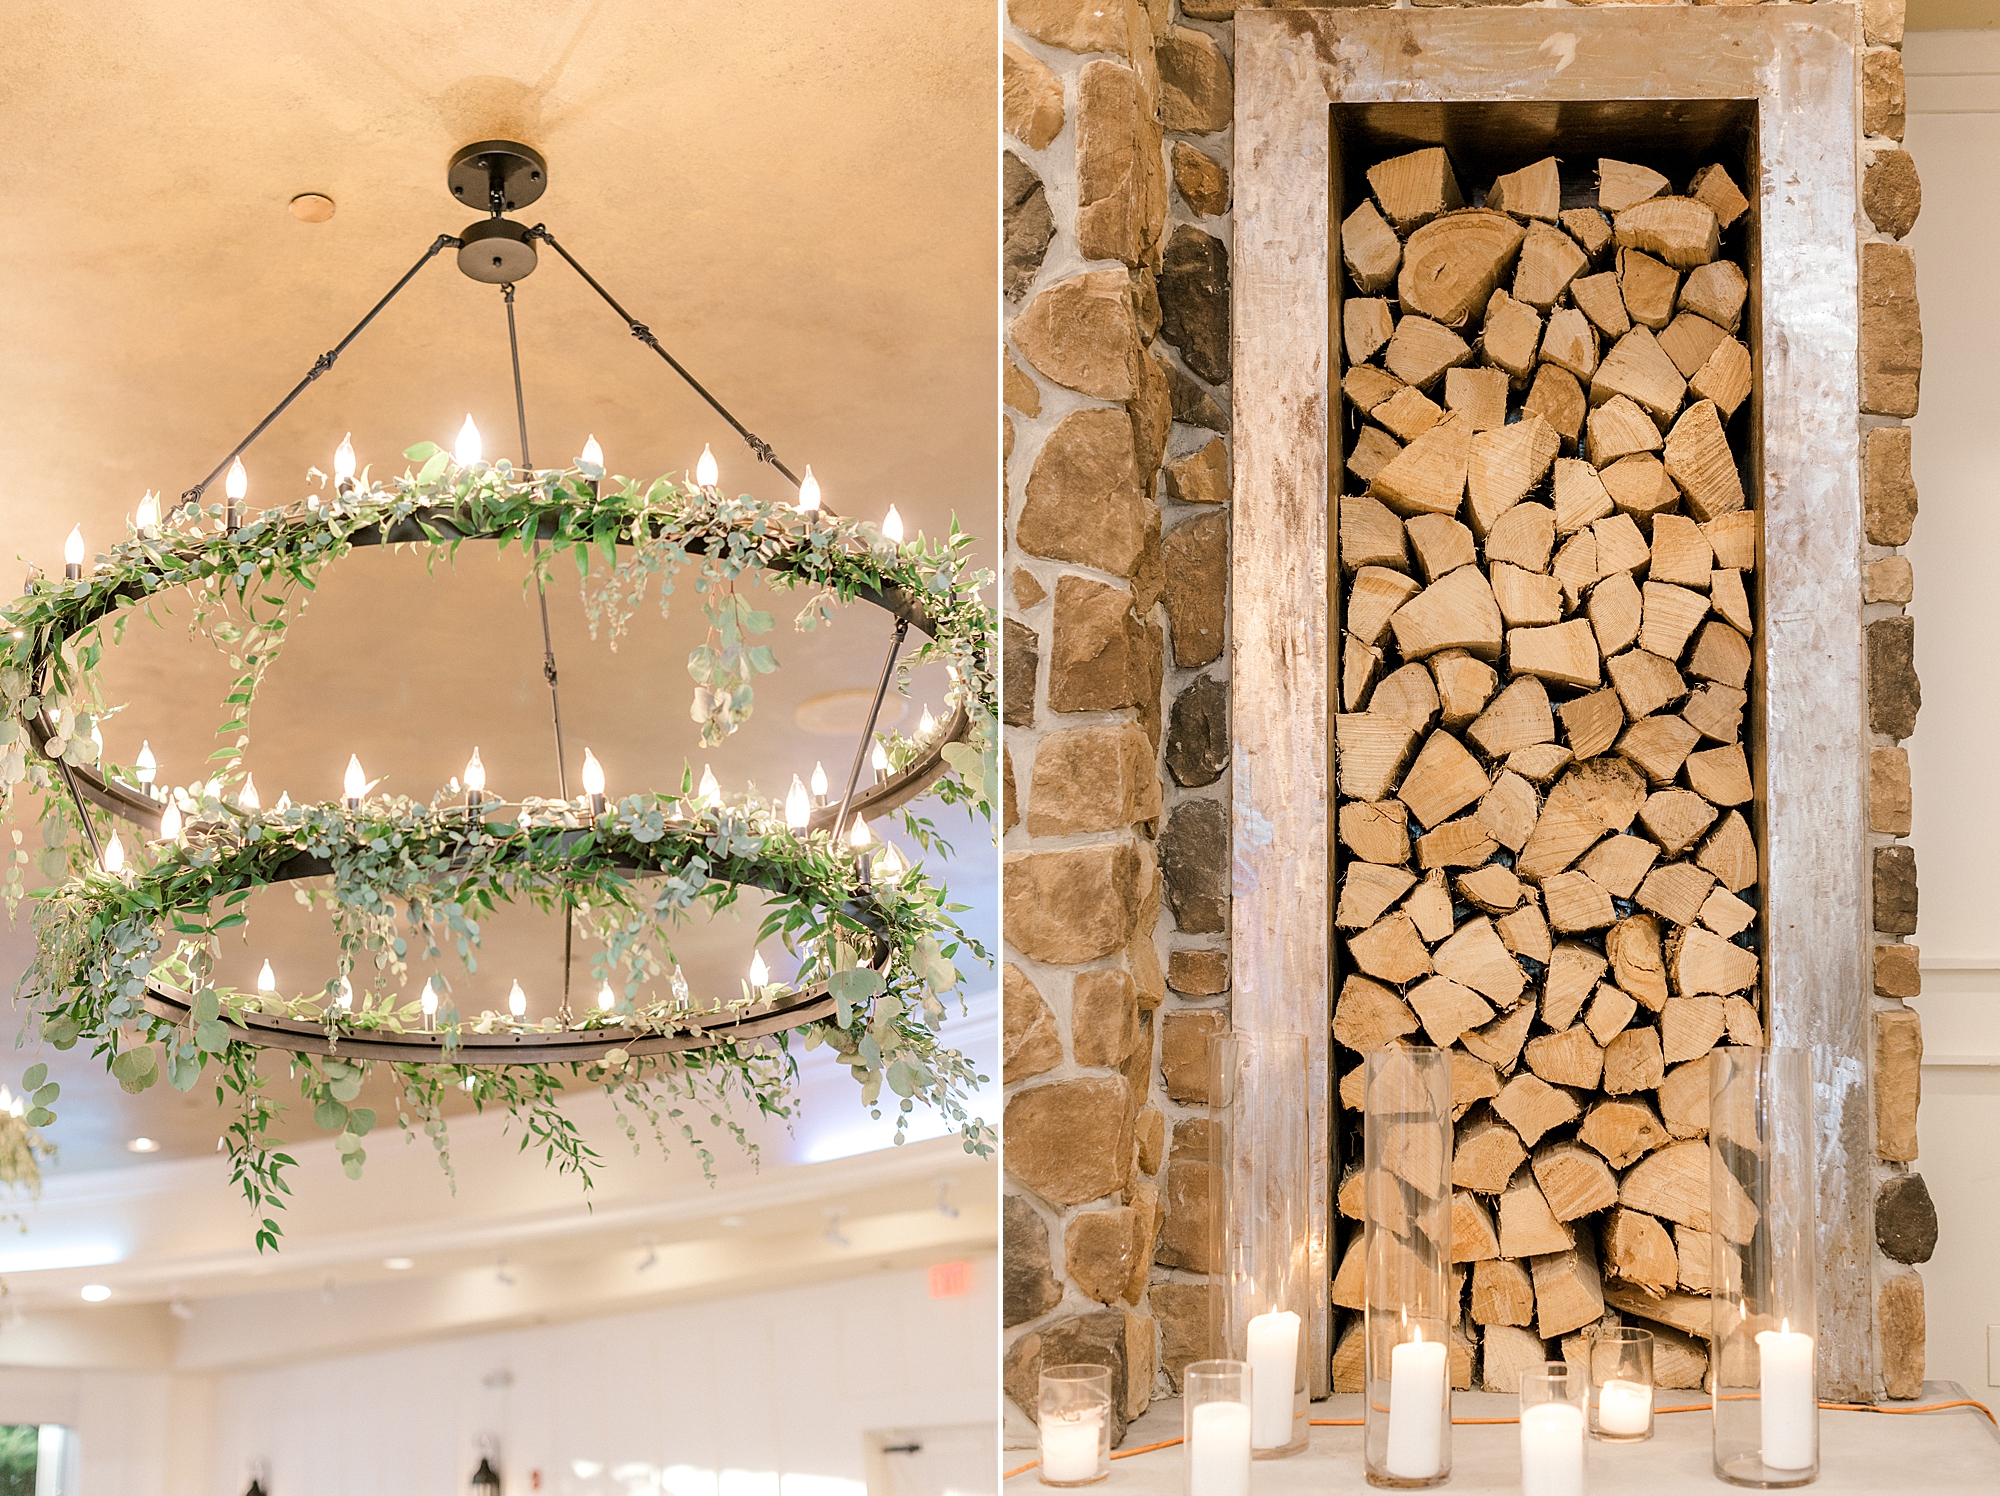 hanging chandelier and candles by stacks of wood at the Farmhouse